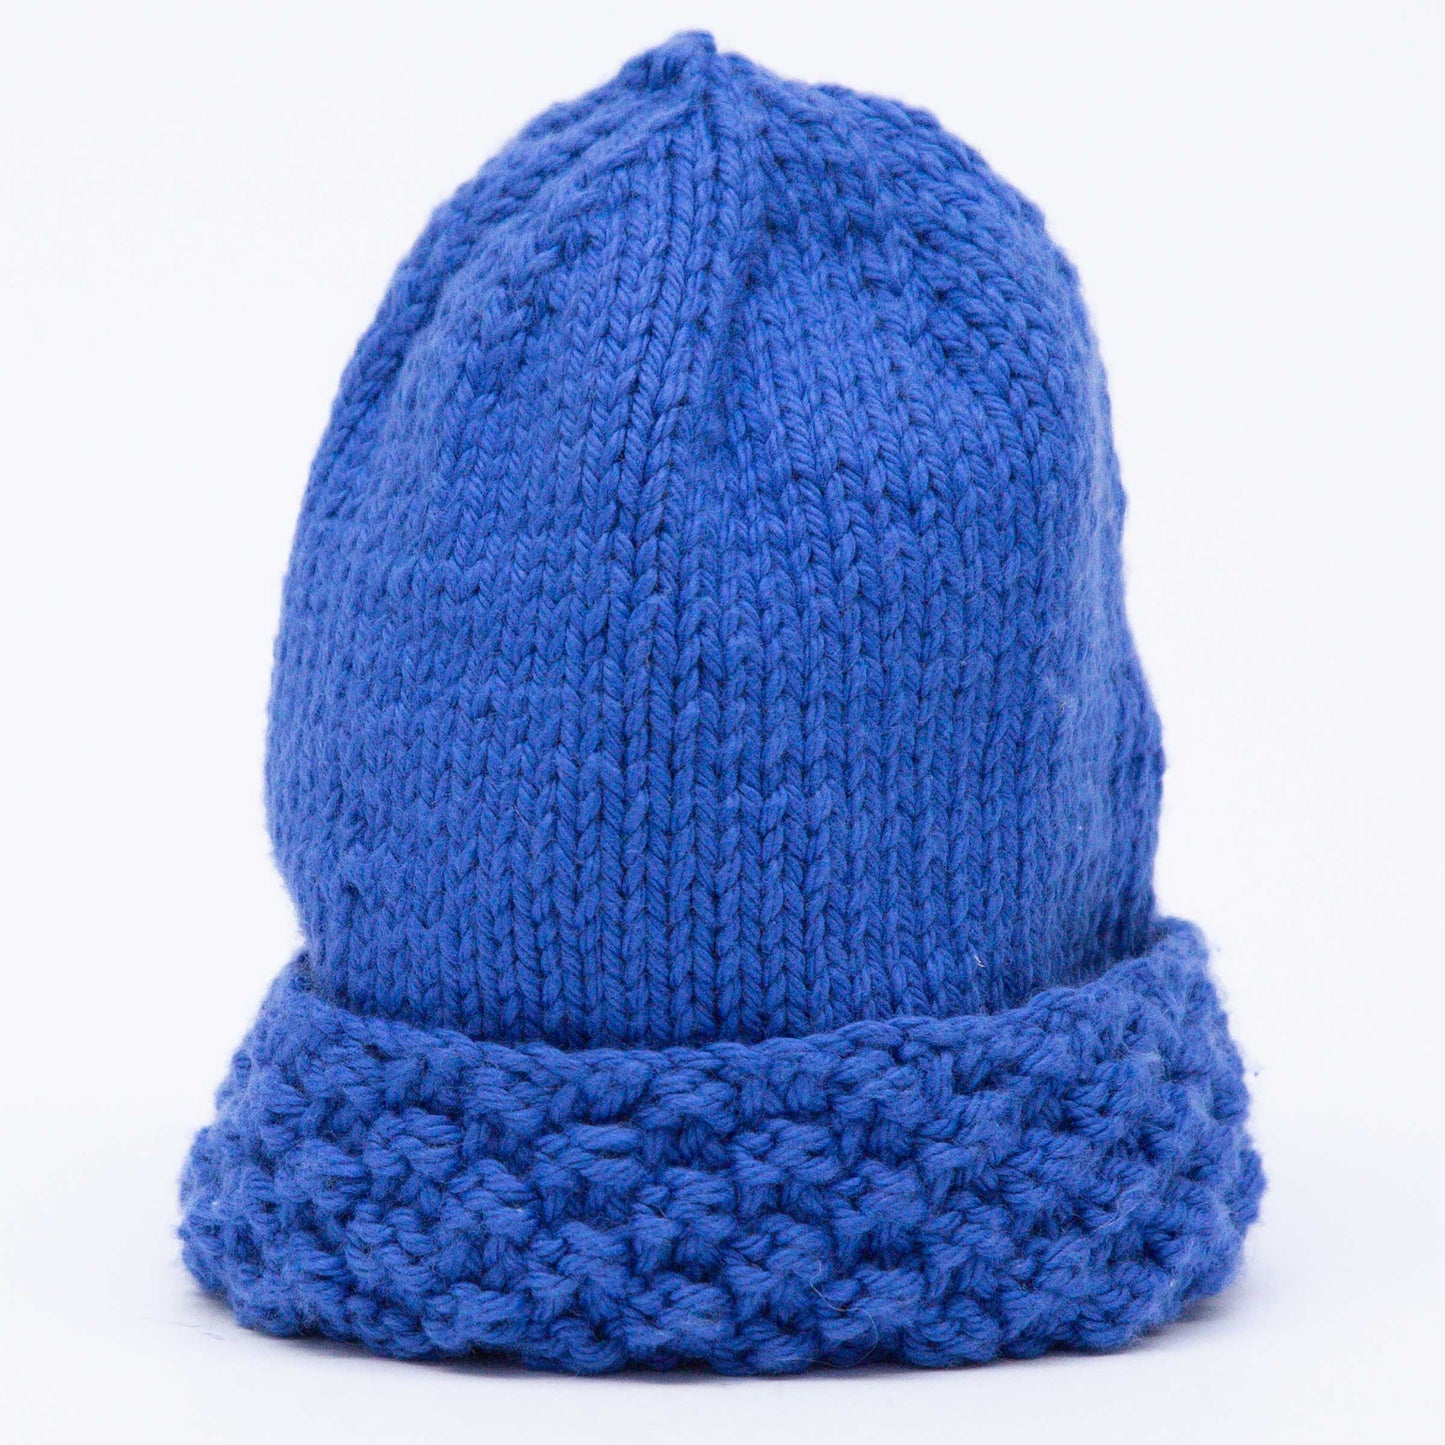 Knitted Baby Hat, Hand Knit, 100% Cotton, Washable, Royal Blue